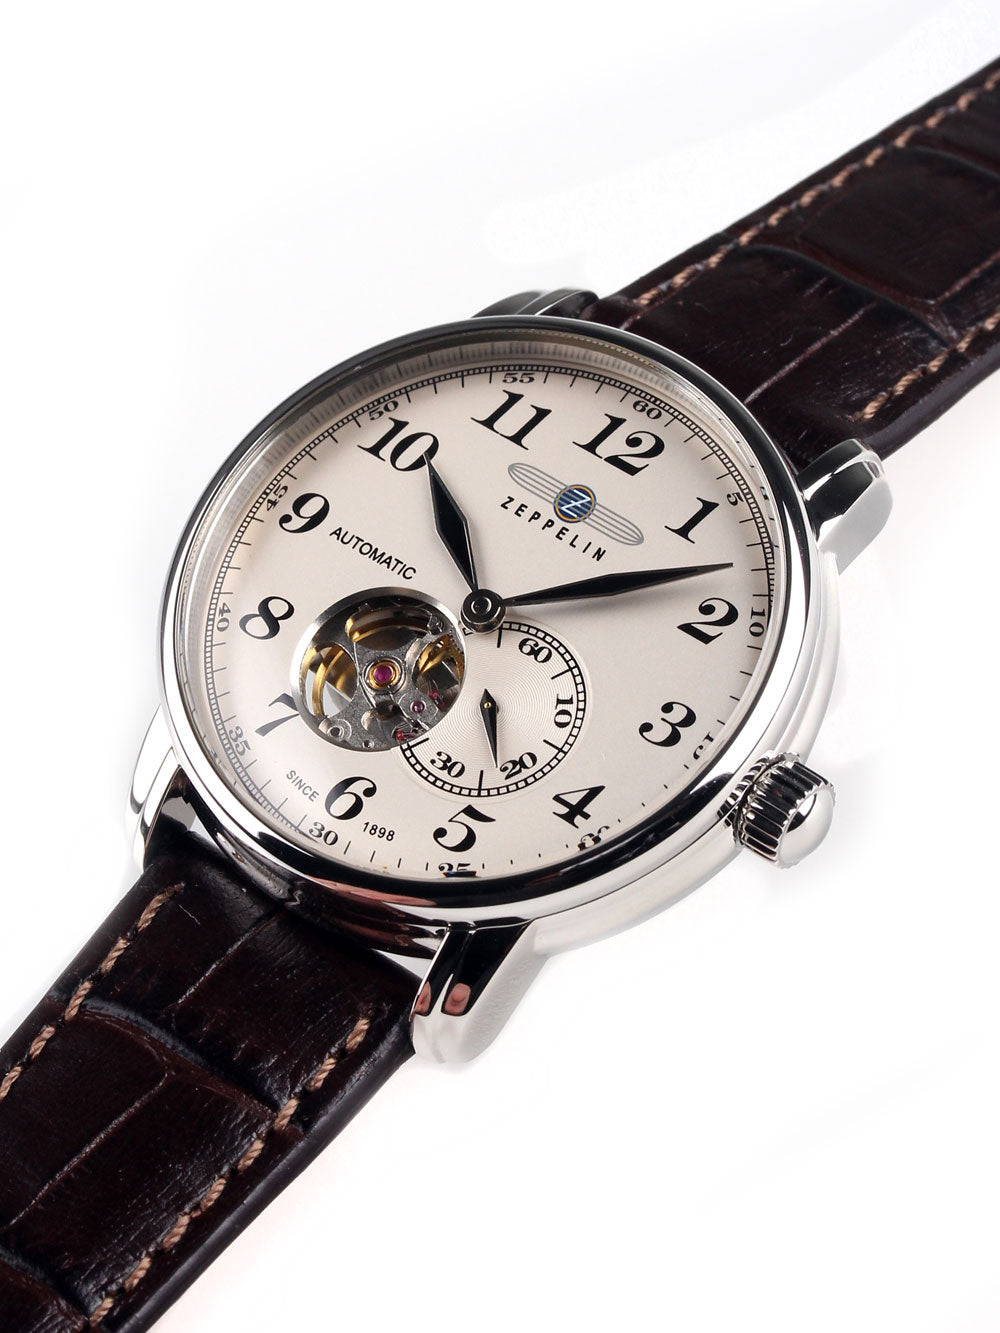 Zeppelin LZ-127 7666-5 automatic silver brown 41mm 50M